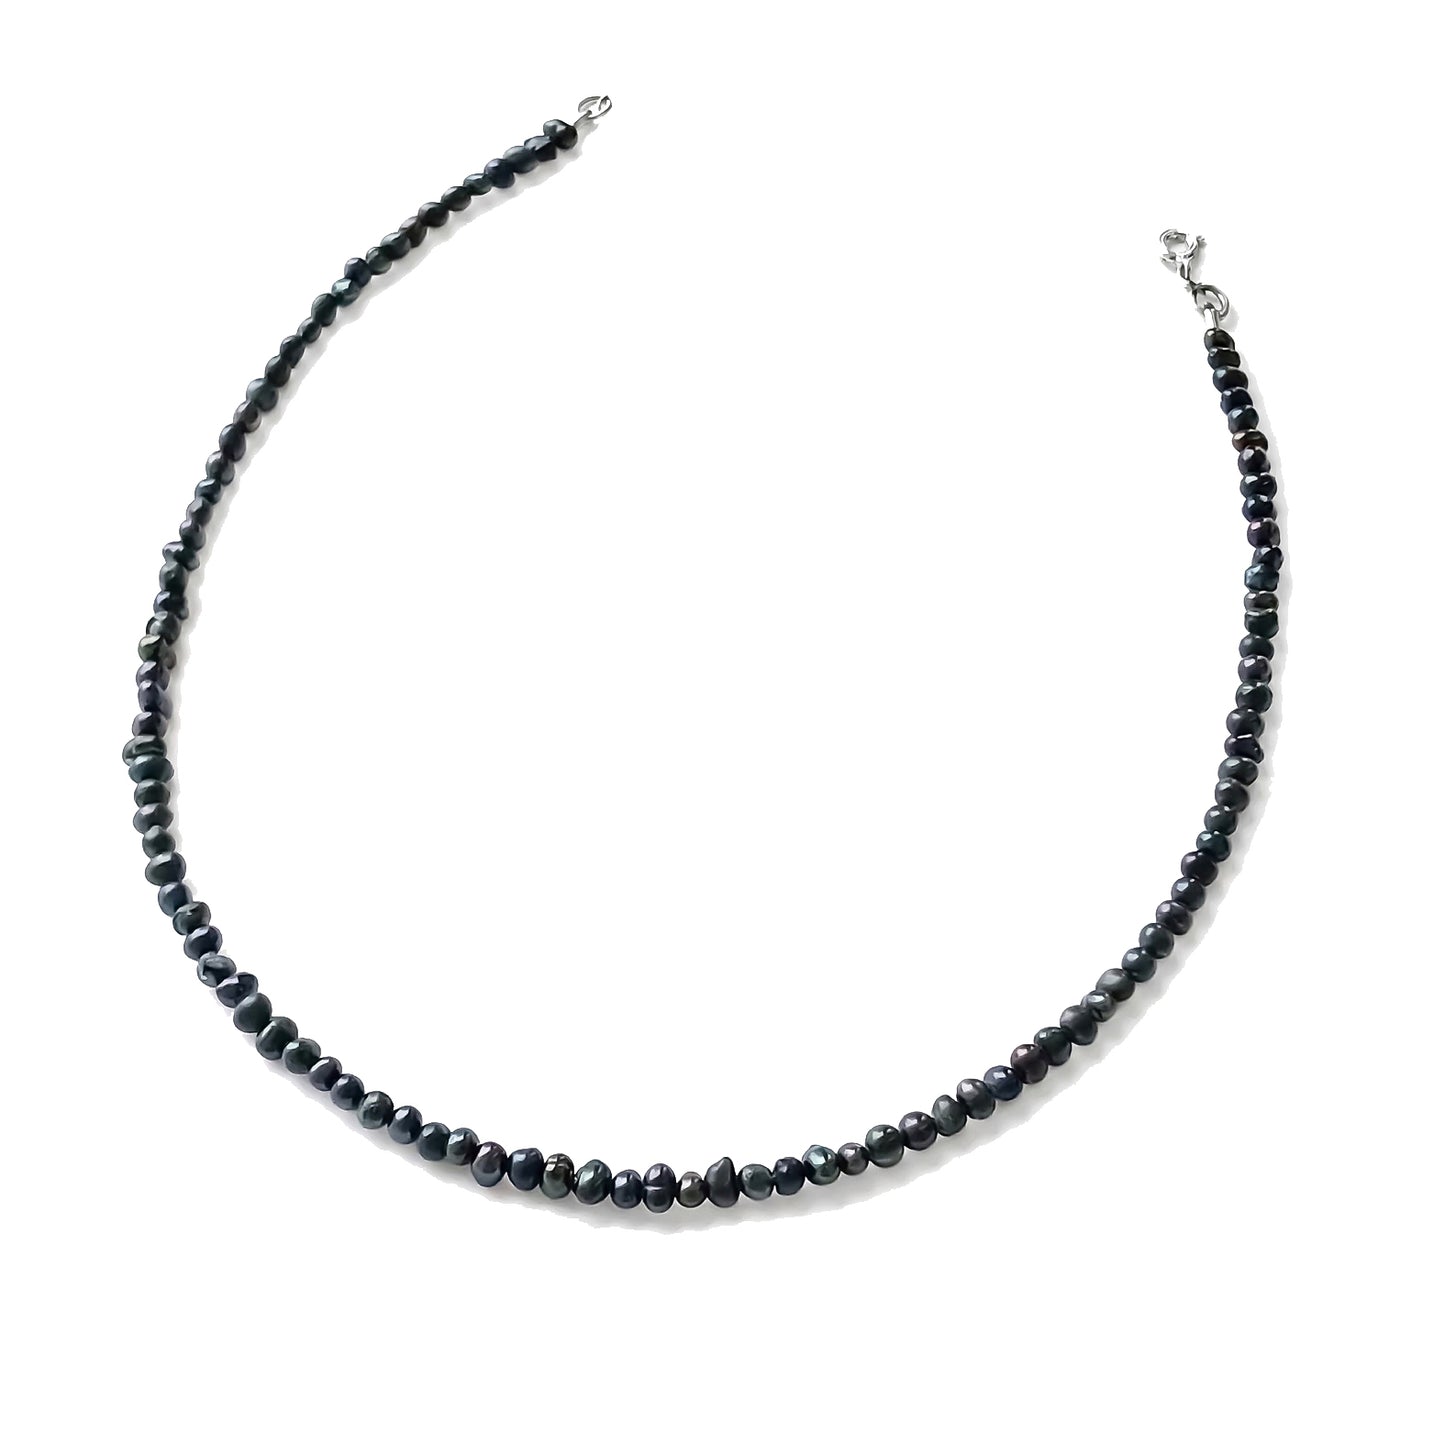 Dark seed pearl necklace